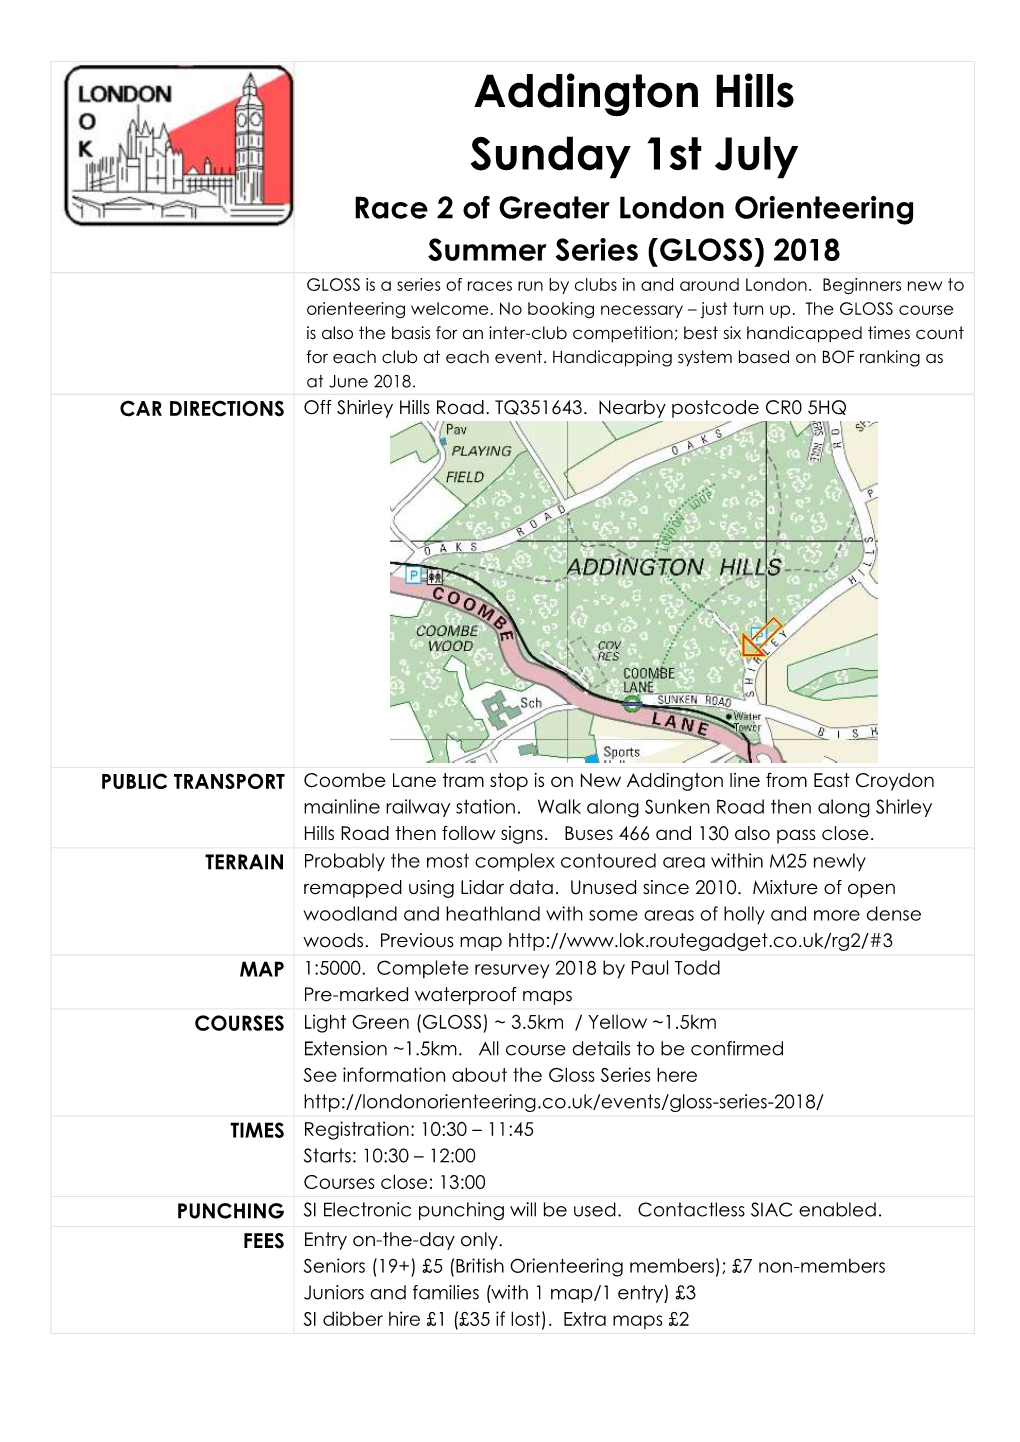 Addington Hills Sunday 1St July Race 2 of Greater London Orienteering Summer Series (GLOSS) 2018 GLOSS Is a Series of Races Run by Clubs in and Around London